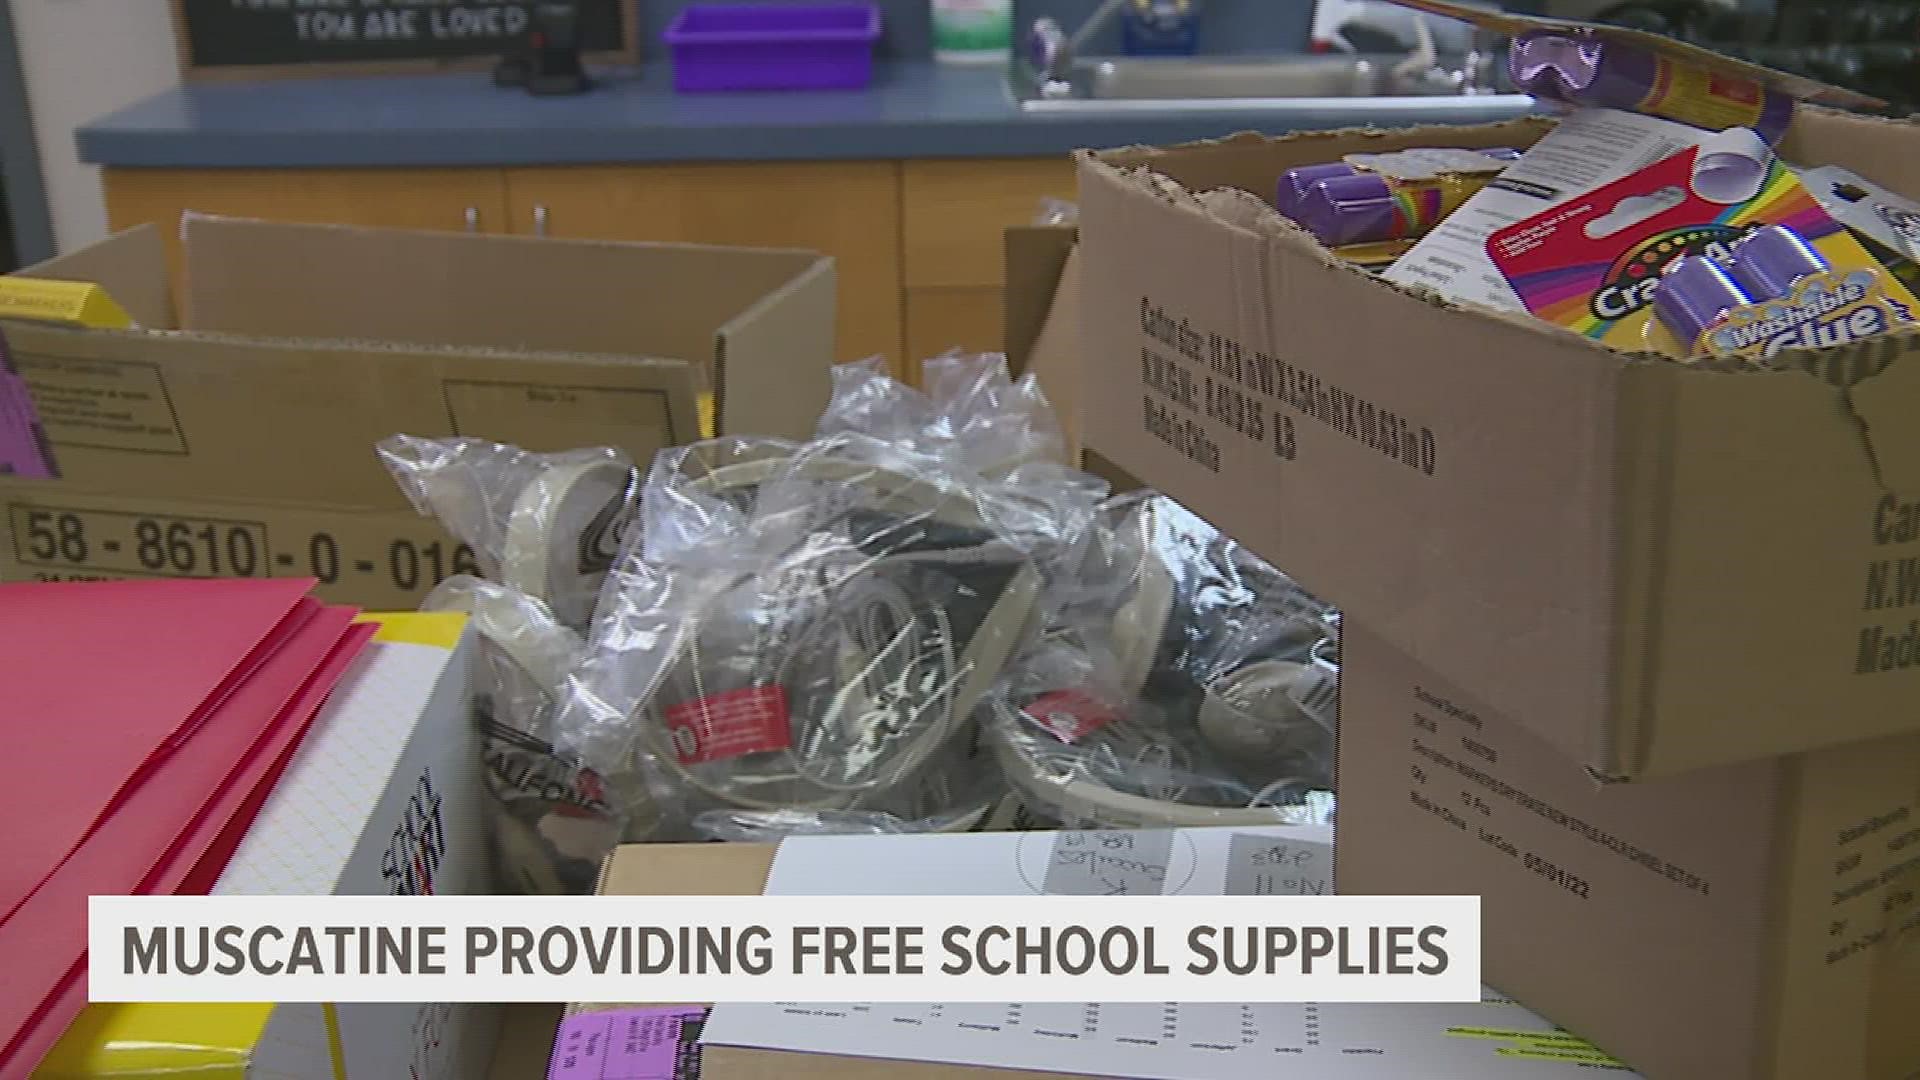 This is the fourth year the school district is distributing free school supplies to students.